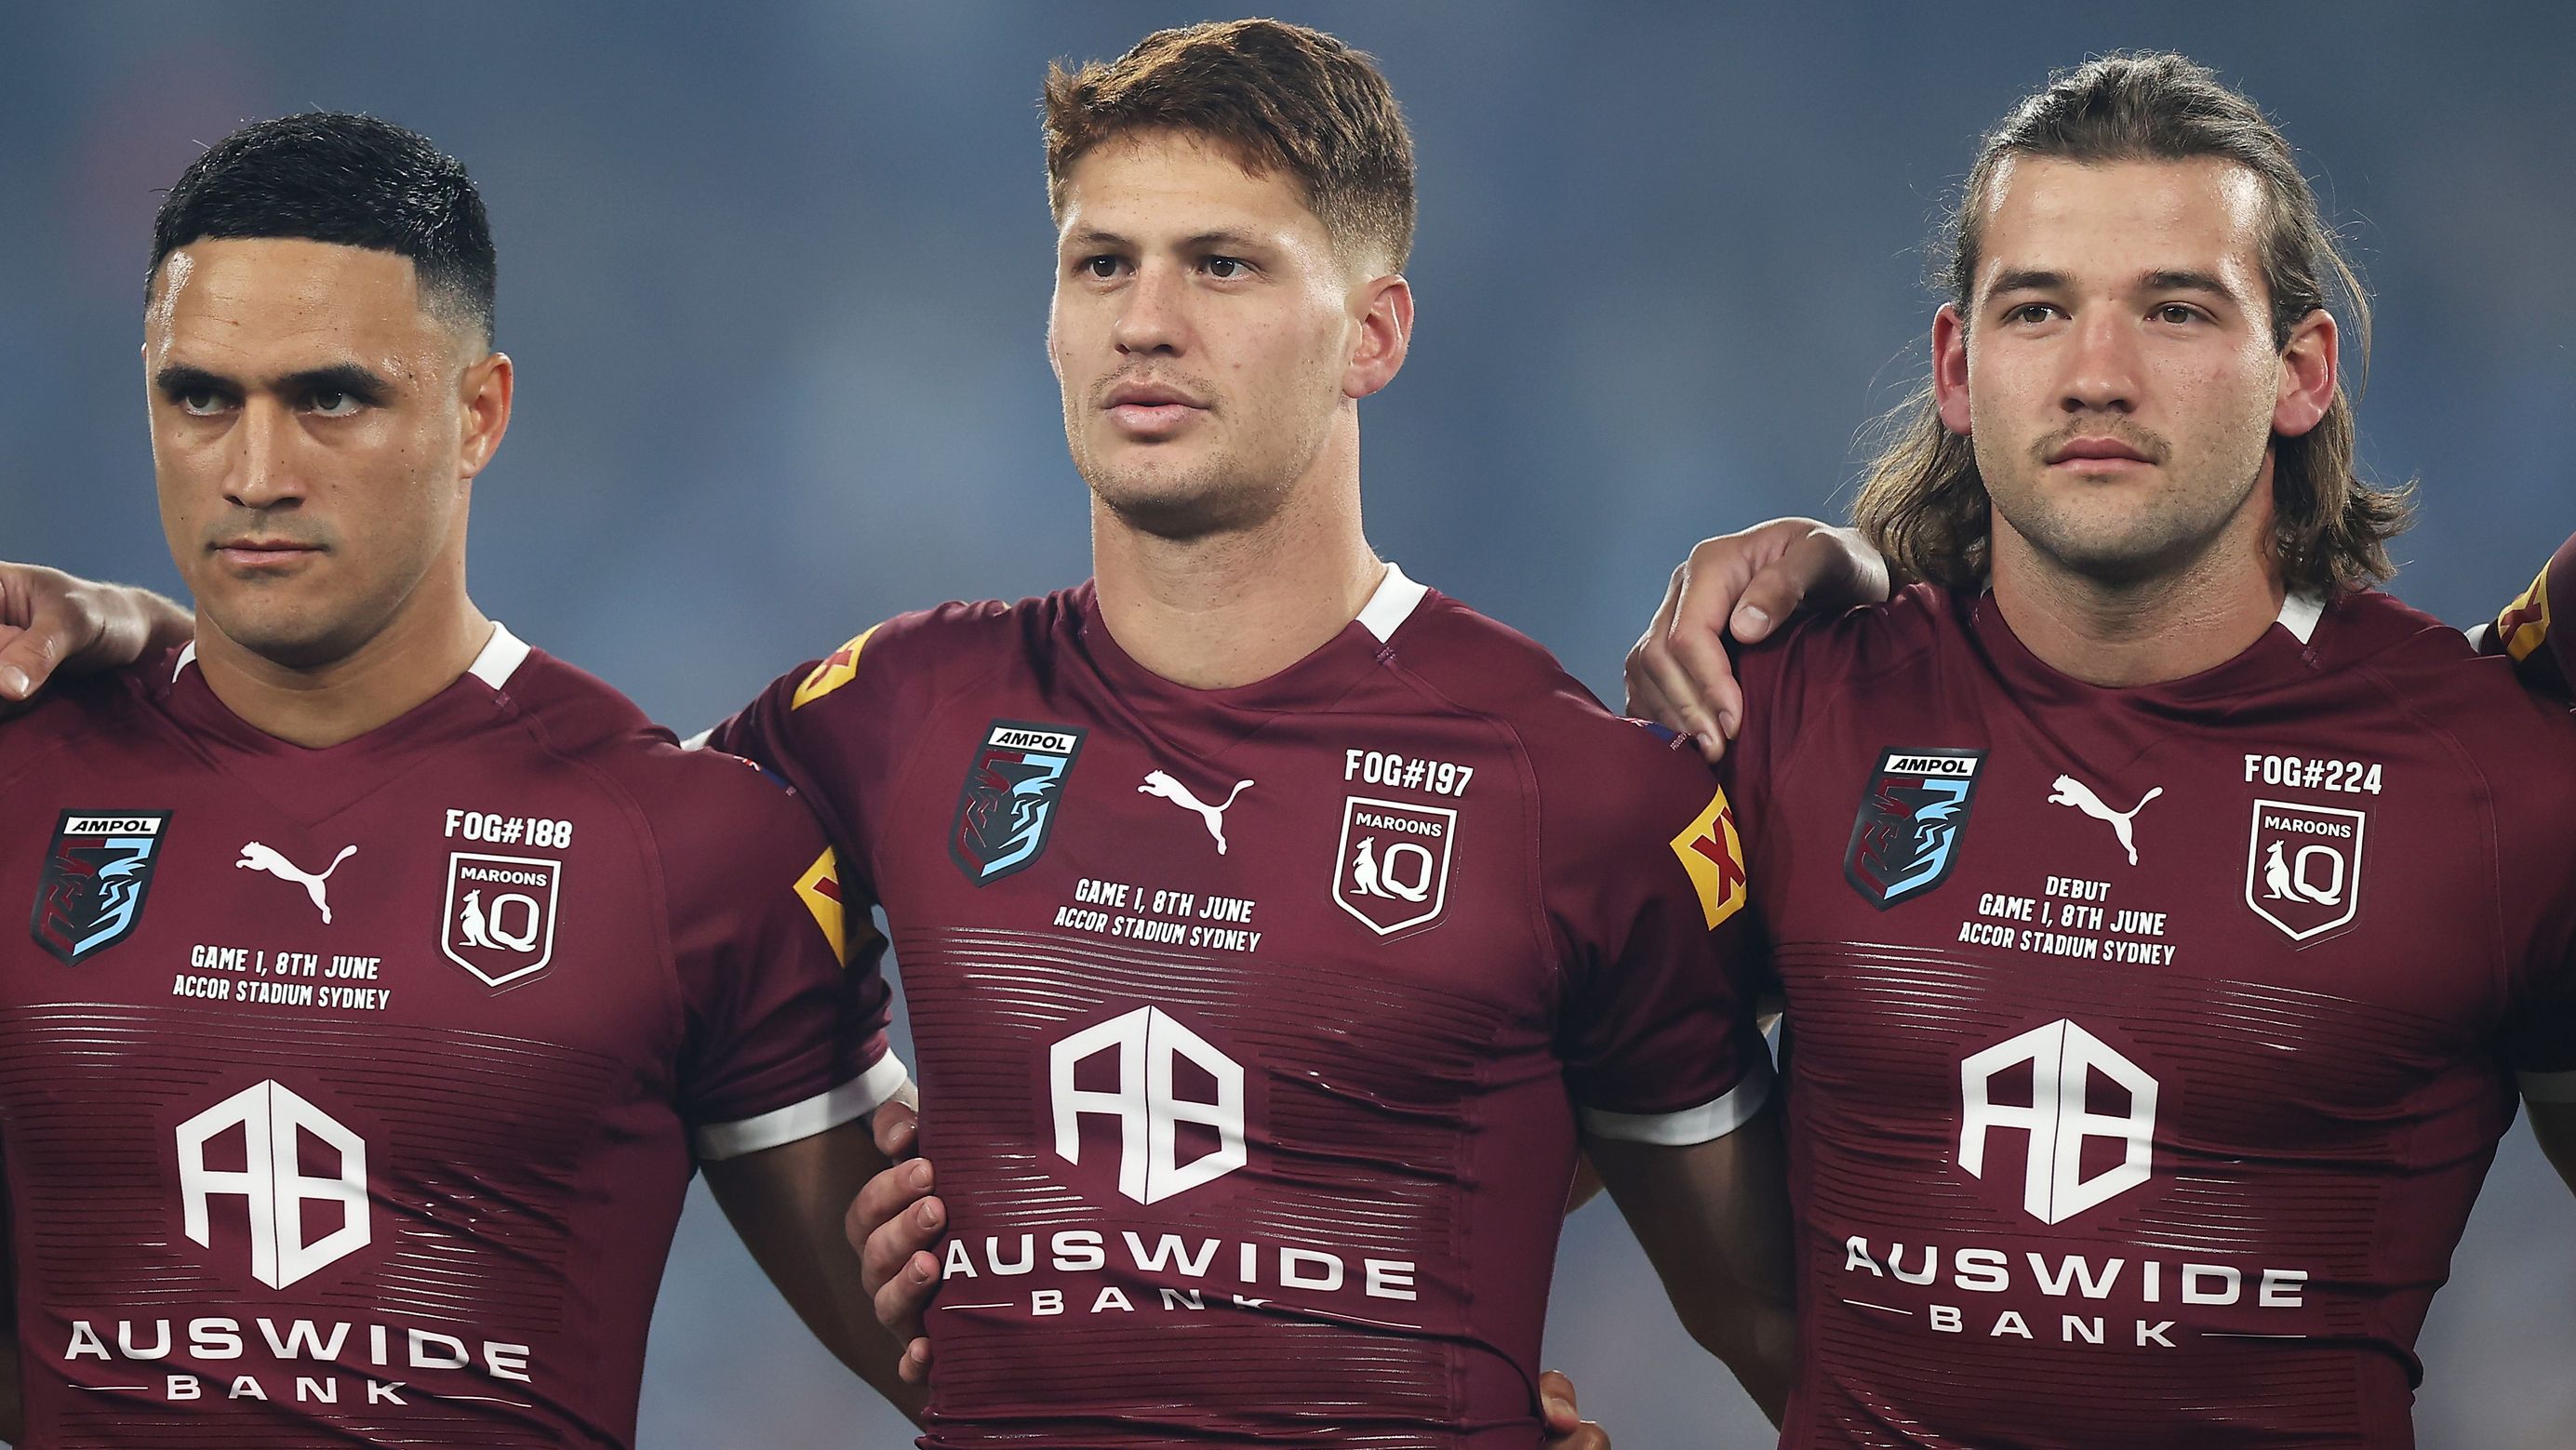 SYDNEY, AUSTRALIA - JUNE 08: (L-R) Valentine Holmes, Kalyn Ponga and Patrick Carrigan of the Maroons line up for the national anthem before game one of the 2022 State of Origin series between the New South Wales Blues and the Queensland Maroons at Accor Stadium on June 08, 2022, in Sydney, Australia. (Photo by Mark Kolbe/Getty Images)